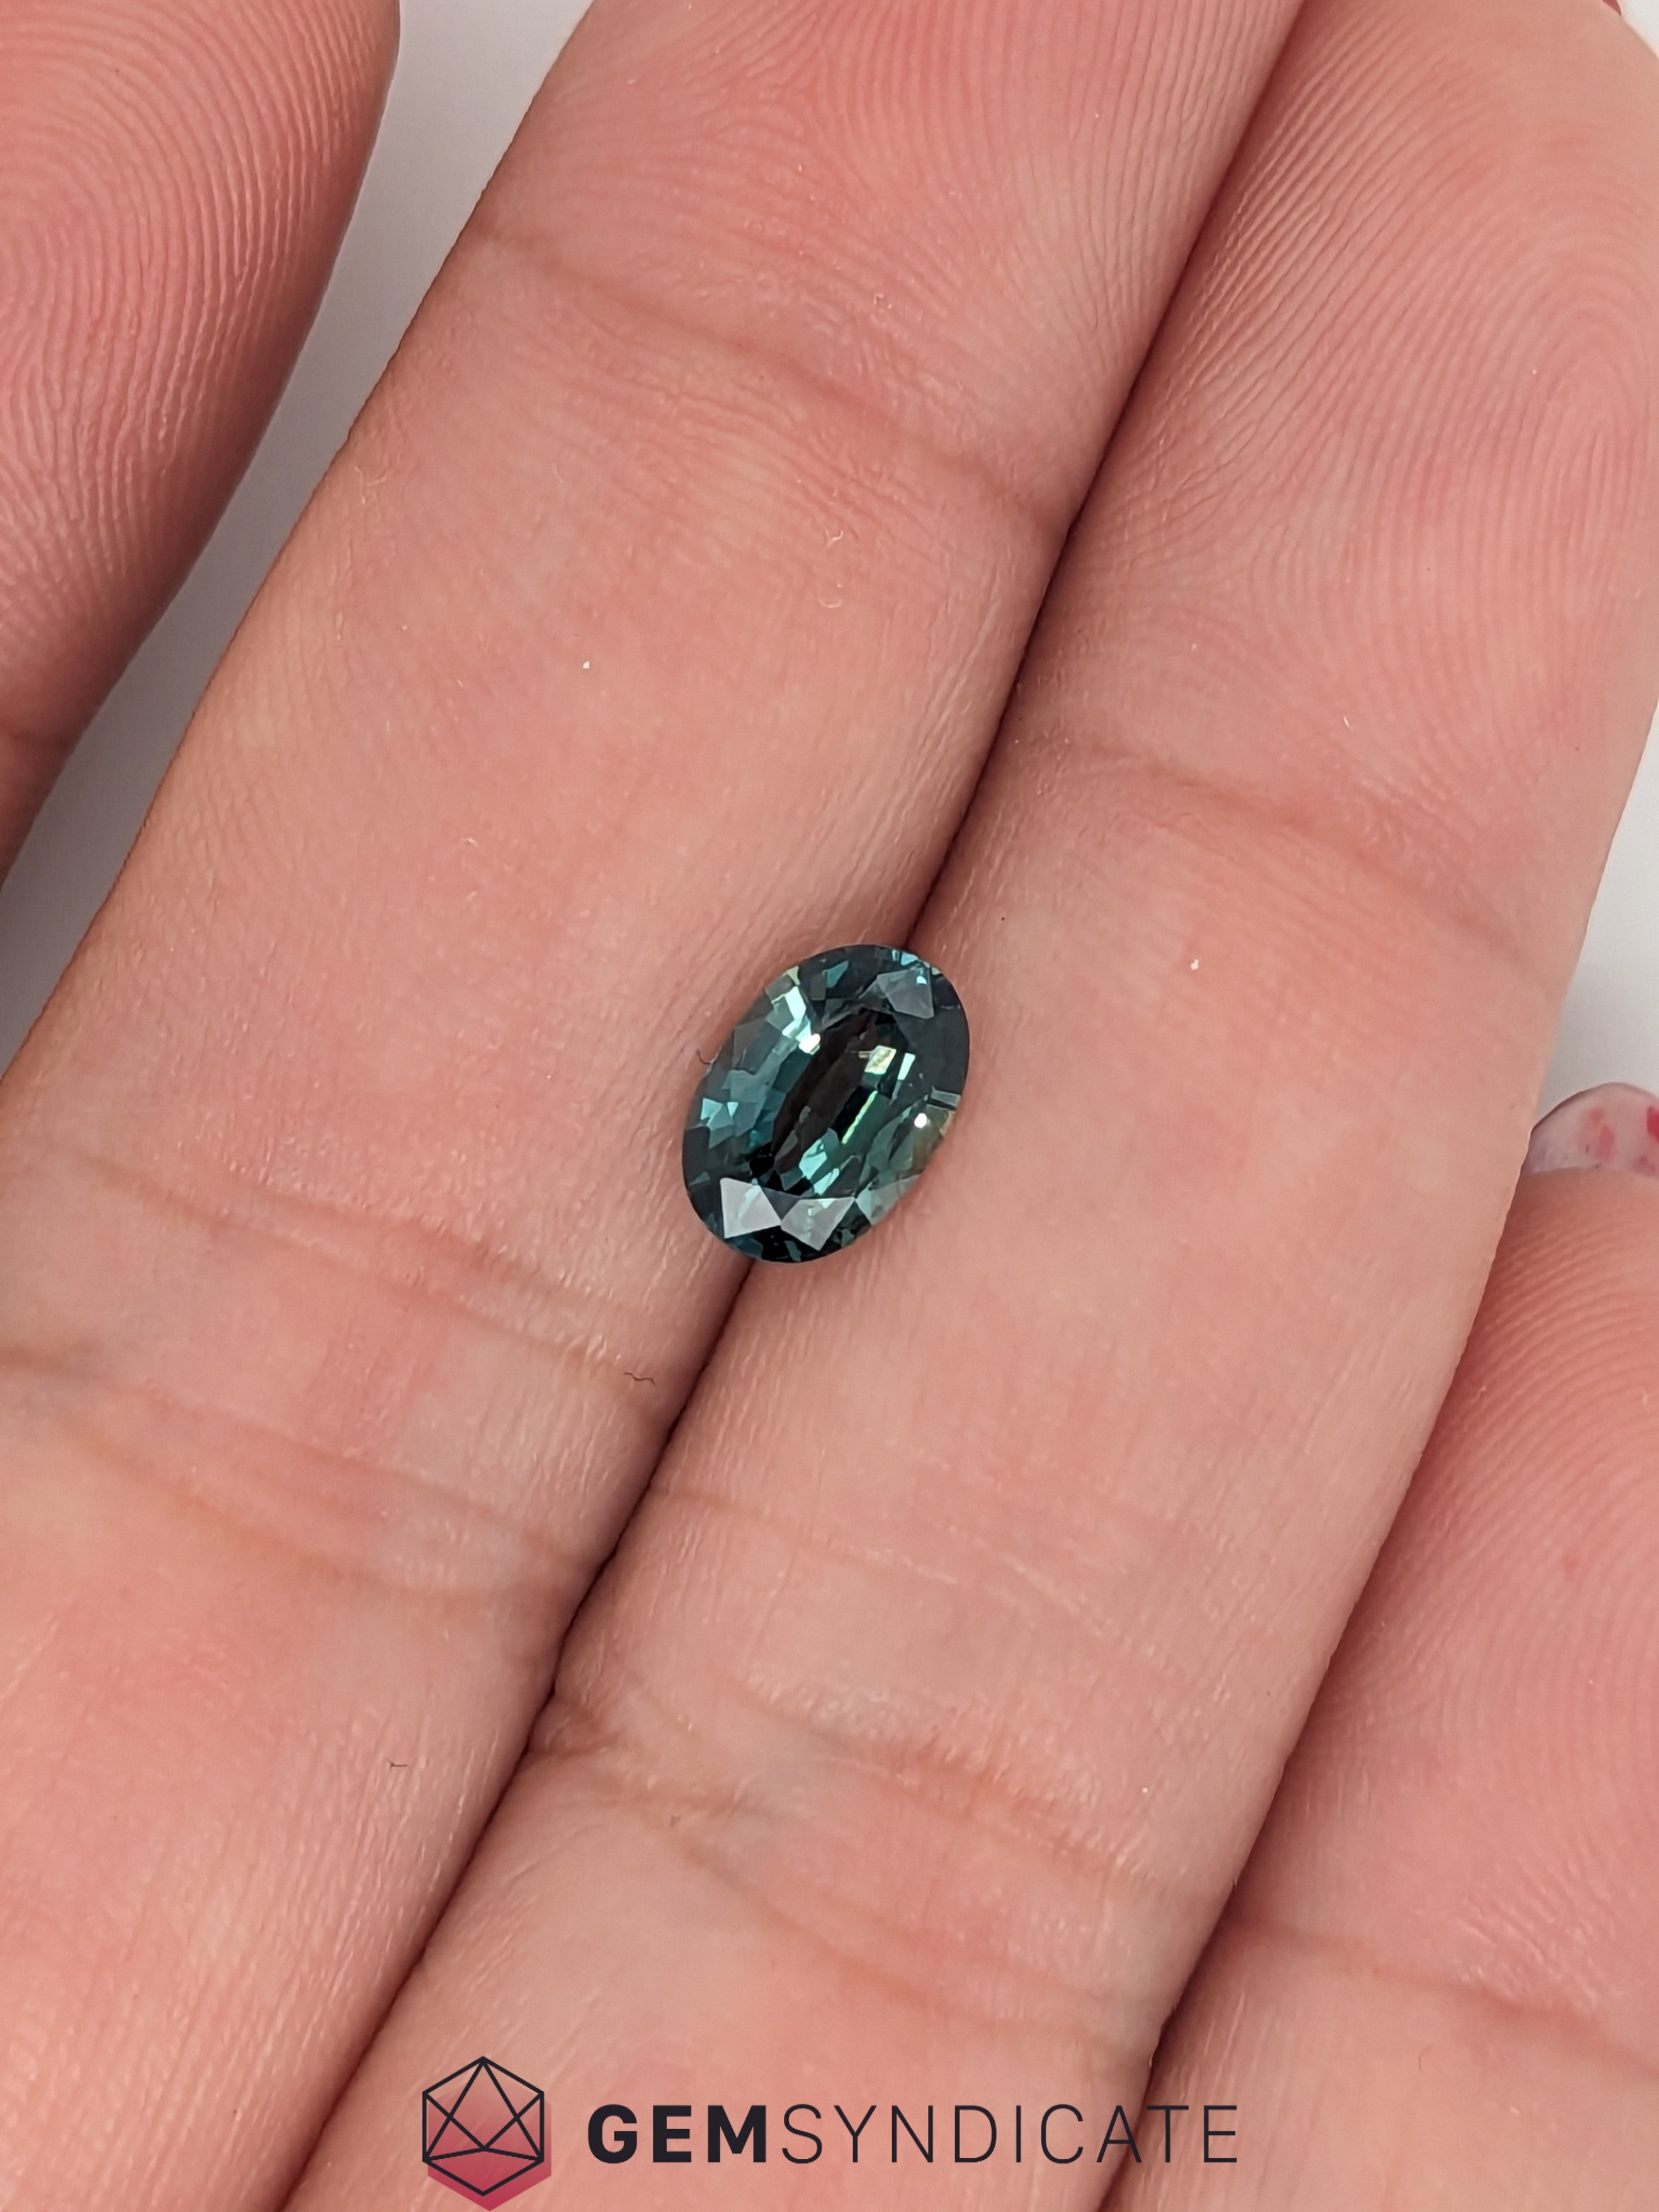 Beautiful Oval Teal Sapphire 1.11ct